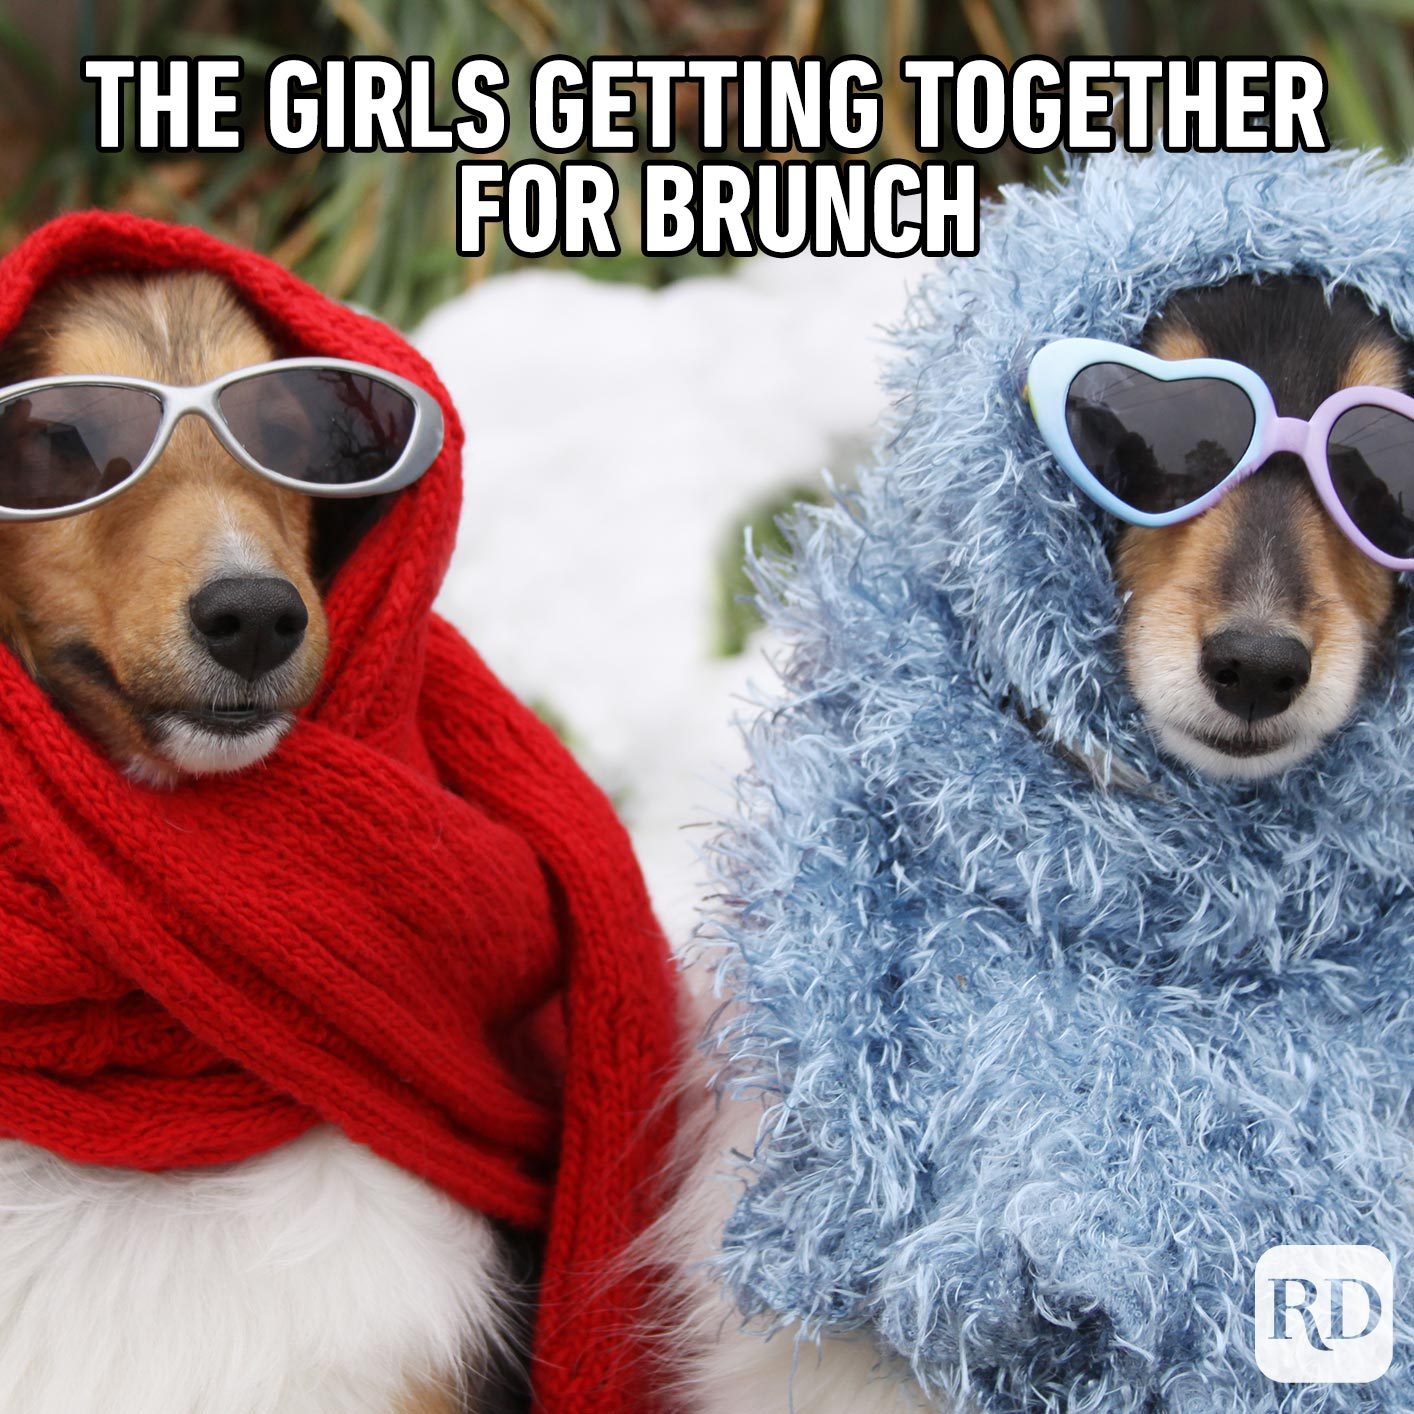 Meme text: The girls getting together for brunch